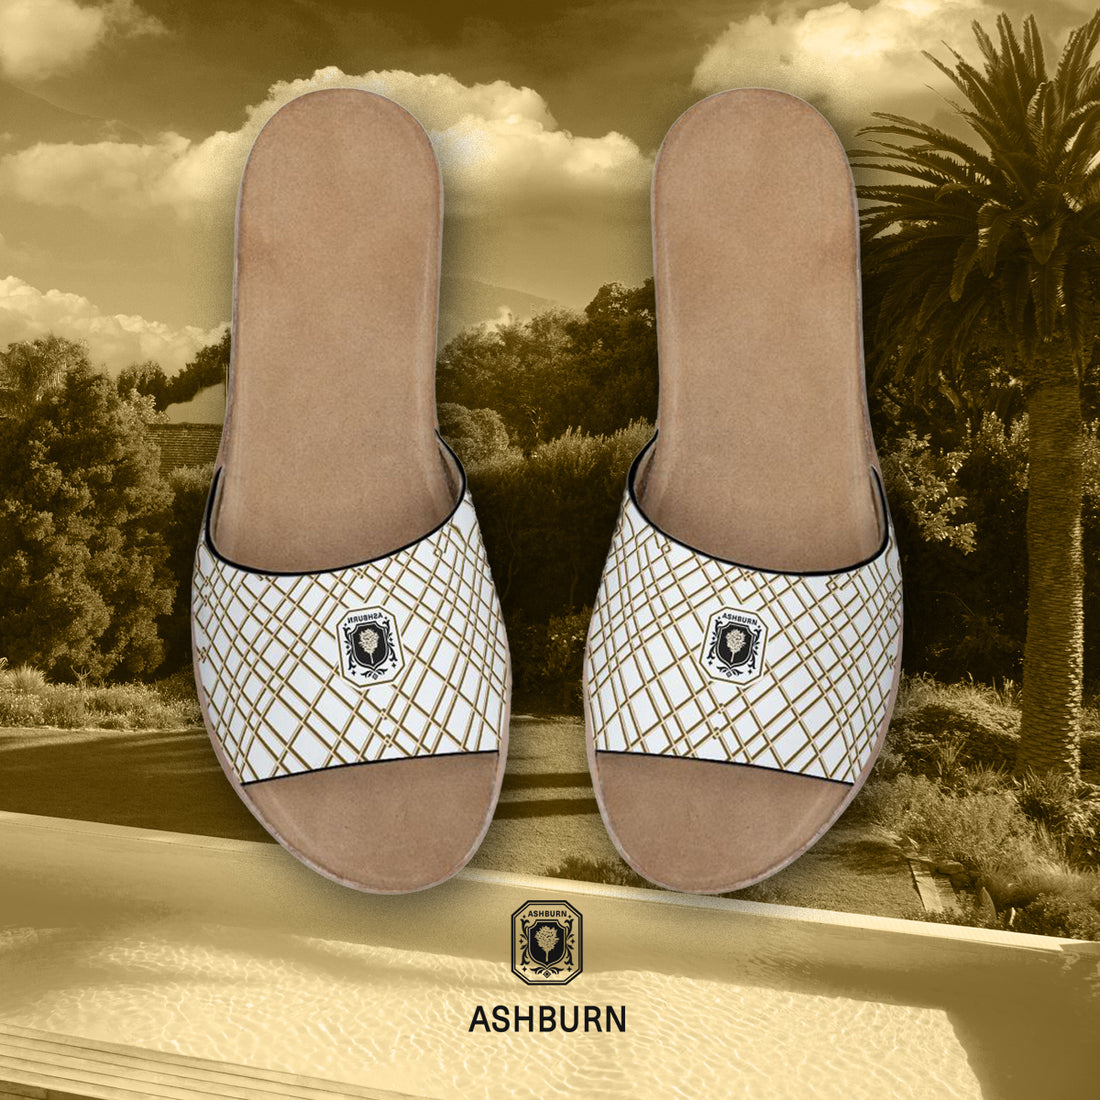 Slide into Summer Luxury: The House of Ashburn Heritage Collection Sandals